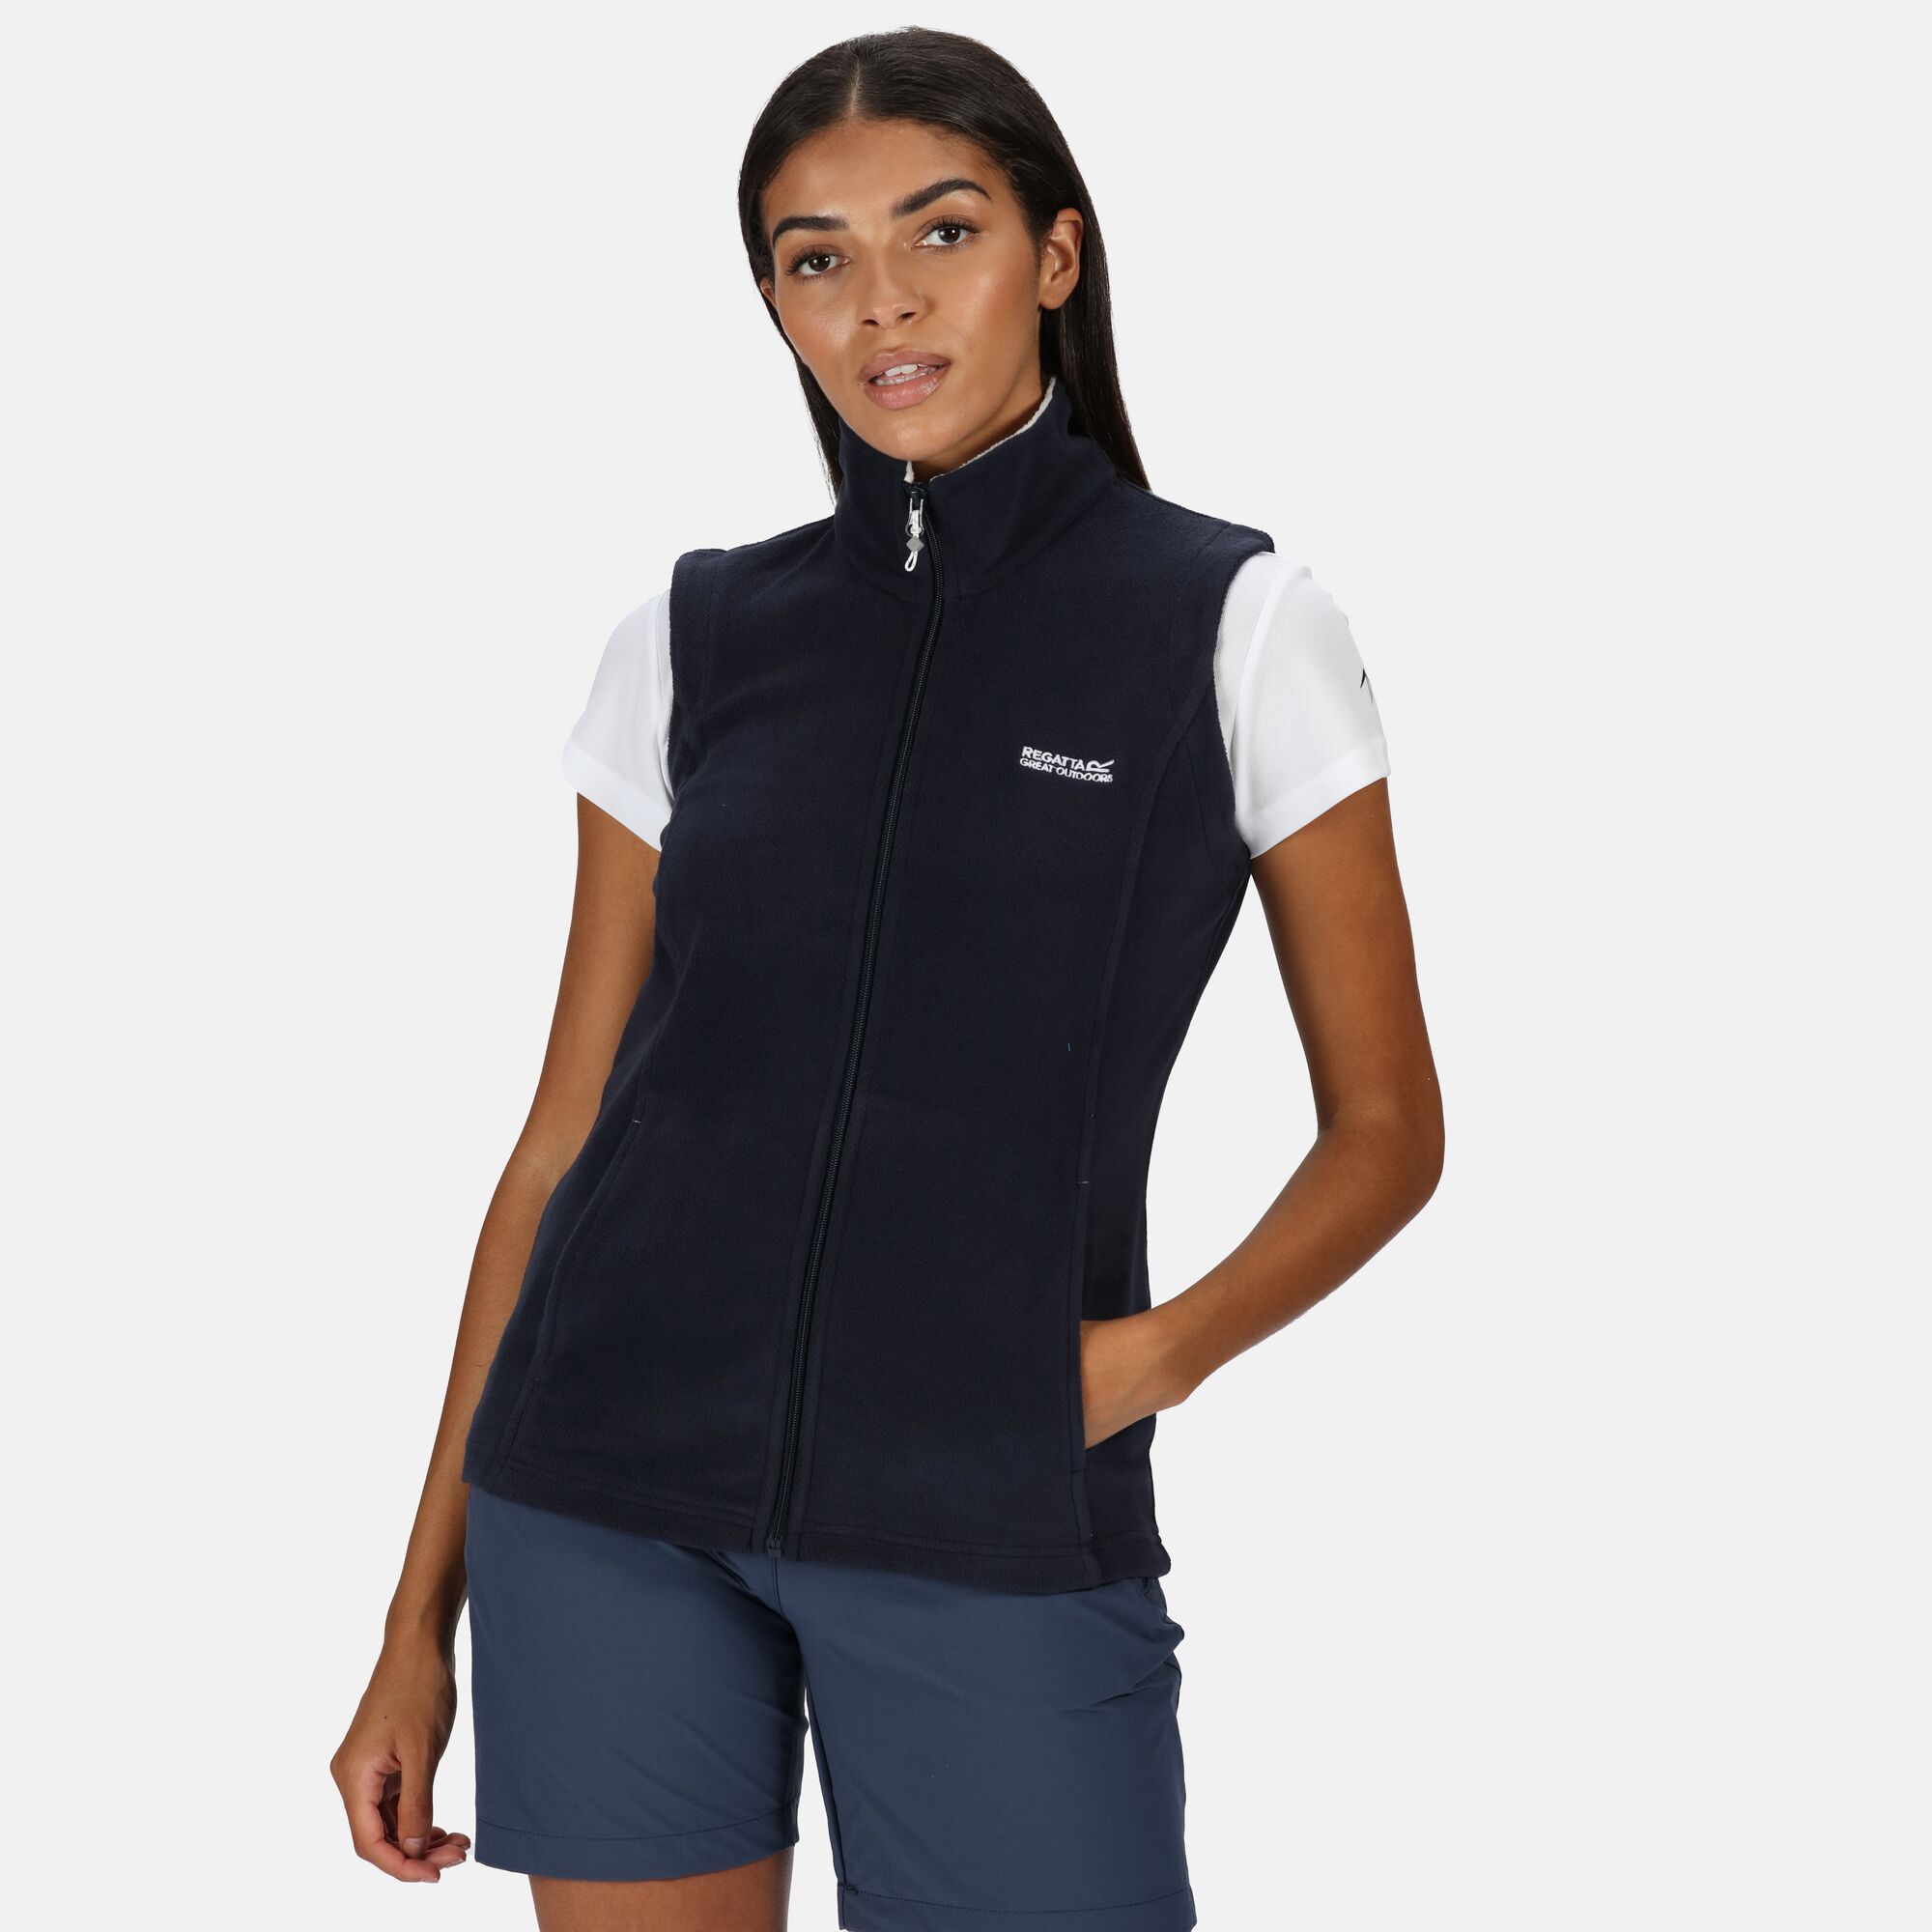 The womens Sweetness is a popular four-season fleece bodywarmer, loved for both its great value and quality. Its cut with a relaxed, everyday fit from lightweight Symmetry fleece with a full zip fastening. Pop it on over tops or blouses when theres a nip in the air or layer it under jackets for extra warmth during winter months. 100% Polyester. Regatta Womens sizing (bust approx): 6 (30in/76cm), 8 (32in/81cm), 10 (34in/86cm), 12 (36in/92cm), 14 (38in/97cm), 16 (40in/102cm), 18 (43in/109cm), 20 (45in/114cm), 22 (48in/122cm), 24 (50in/127cm), 26 (52in/132cm), 28 (54in/137cm), 30 (56in/142cm), 32 (58in/147cm), 34 (60in/152cm), 36 (62in/158cm).